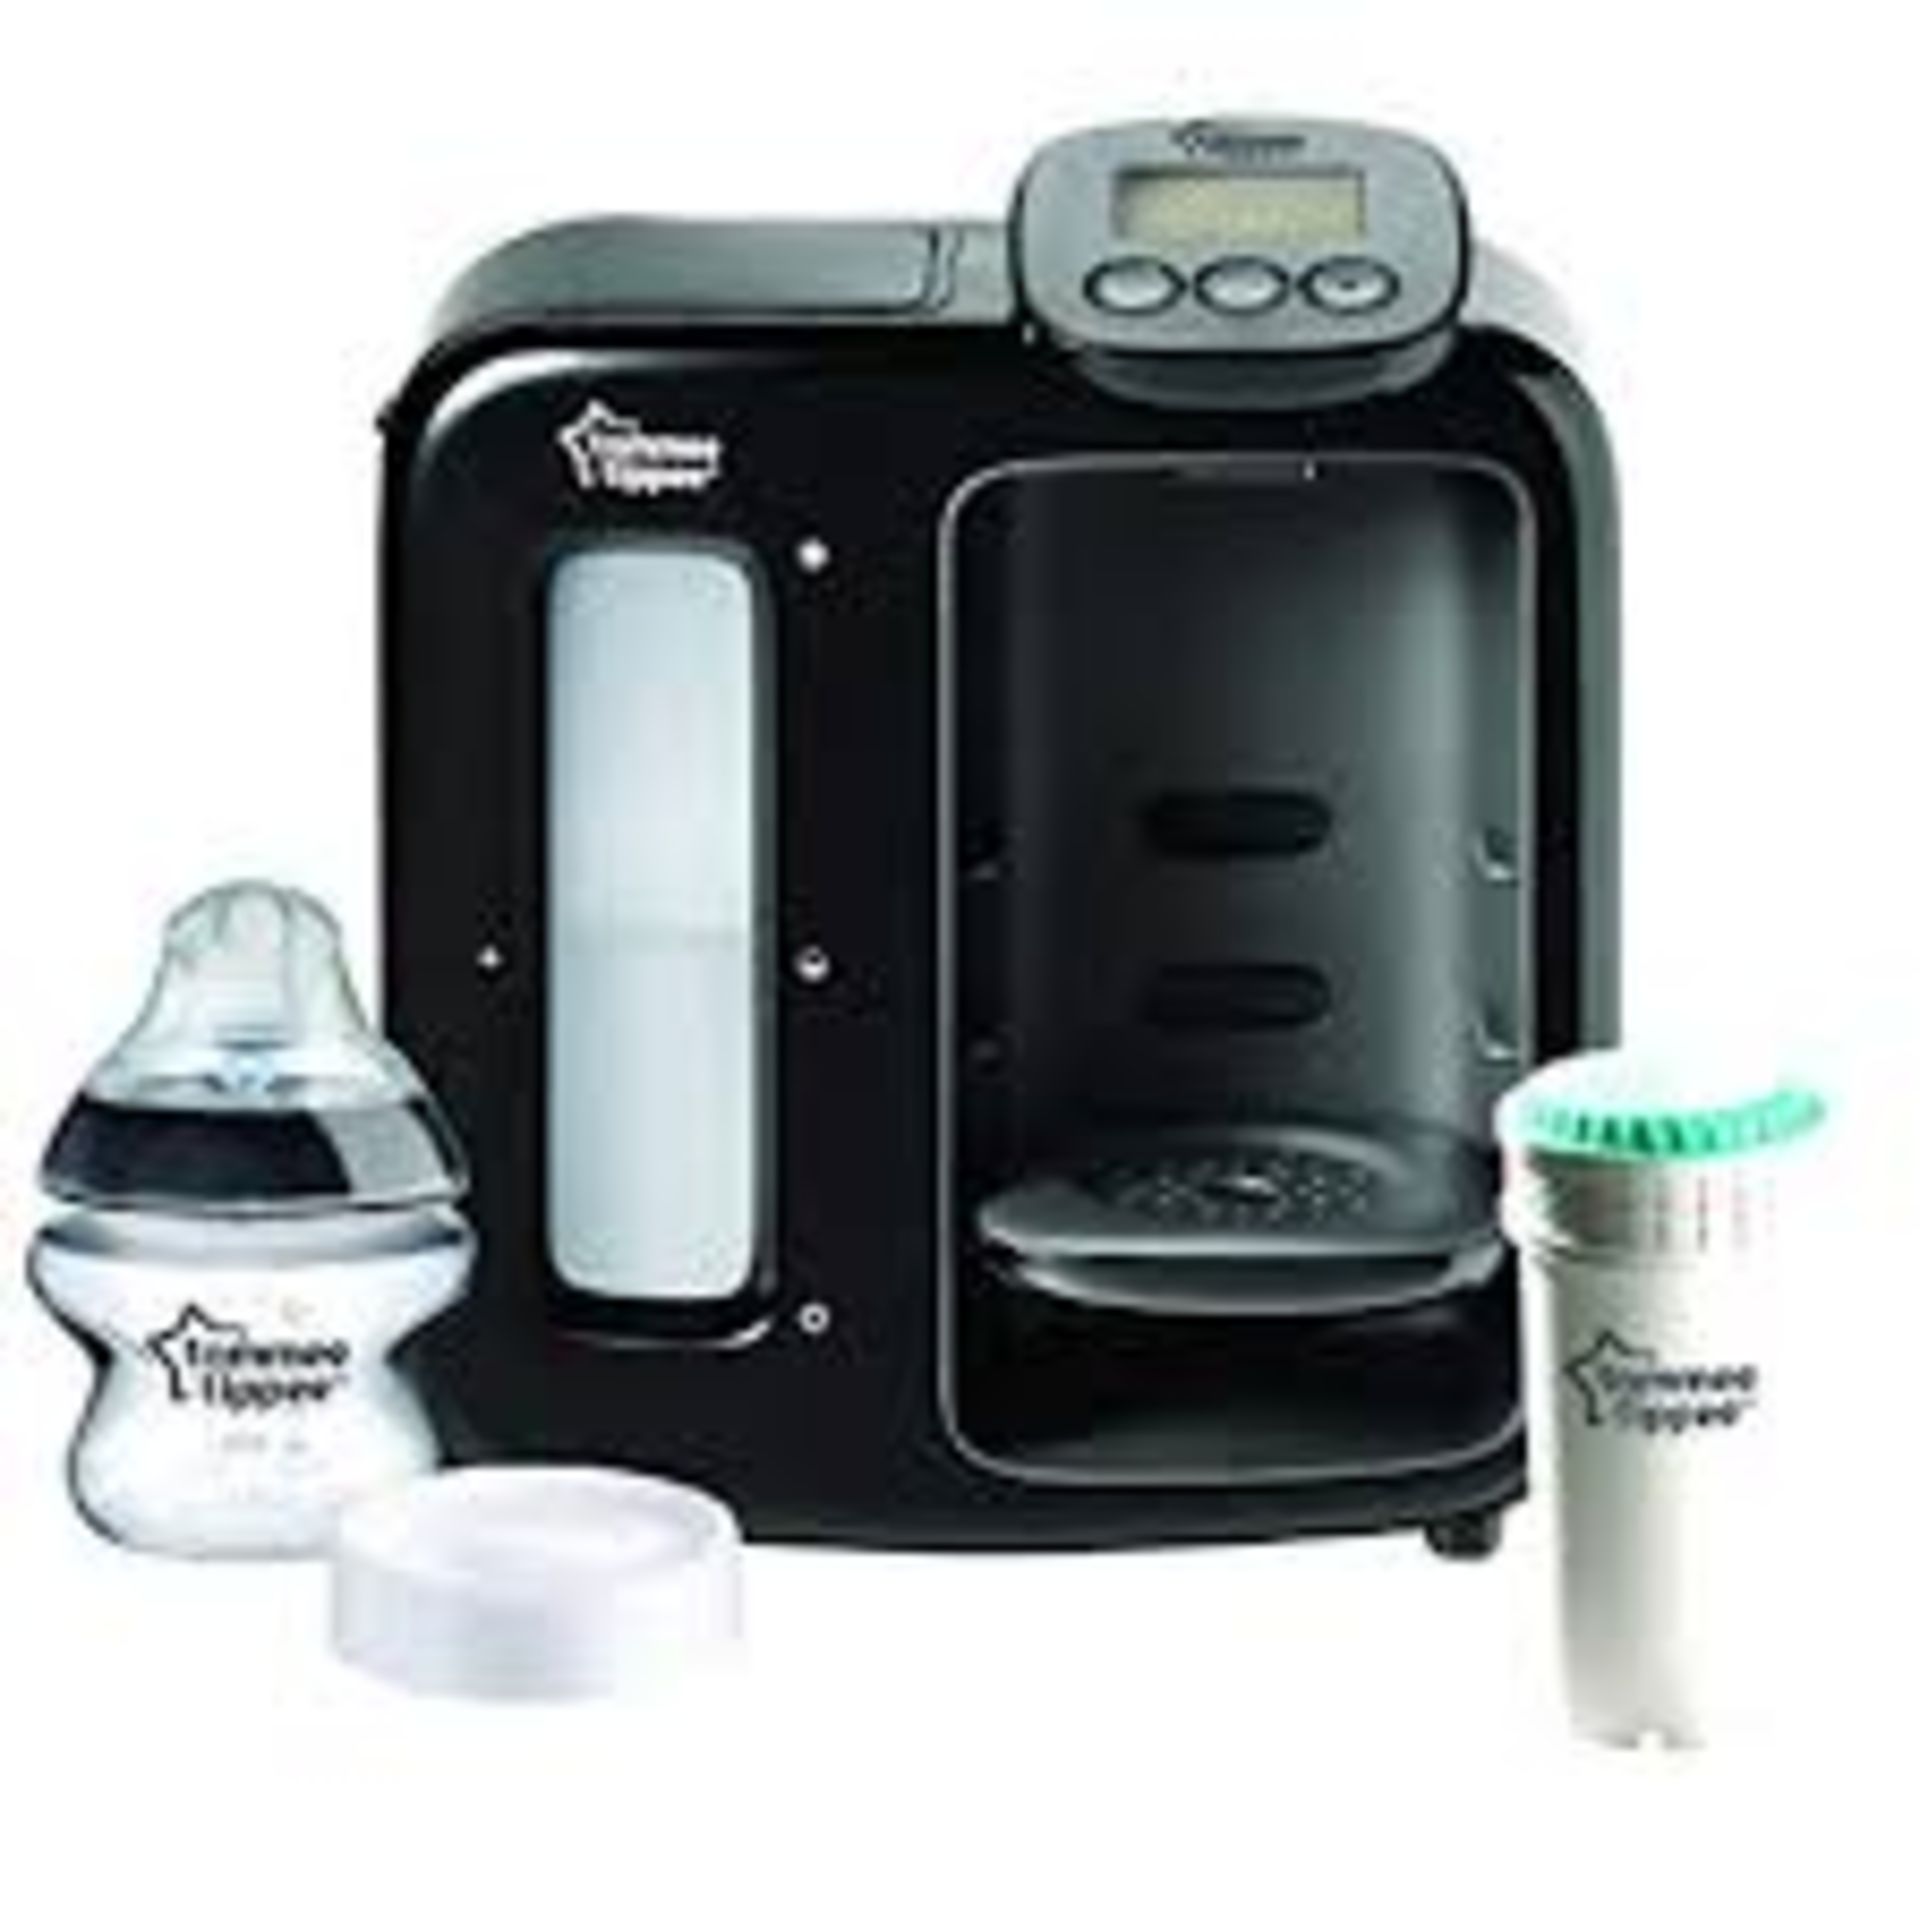 Boxed Tommee Tippee Perfect Preparation Day and Night Bottle Warming Station RRP £130 (